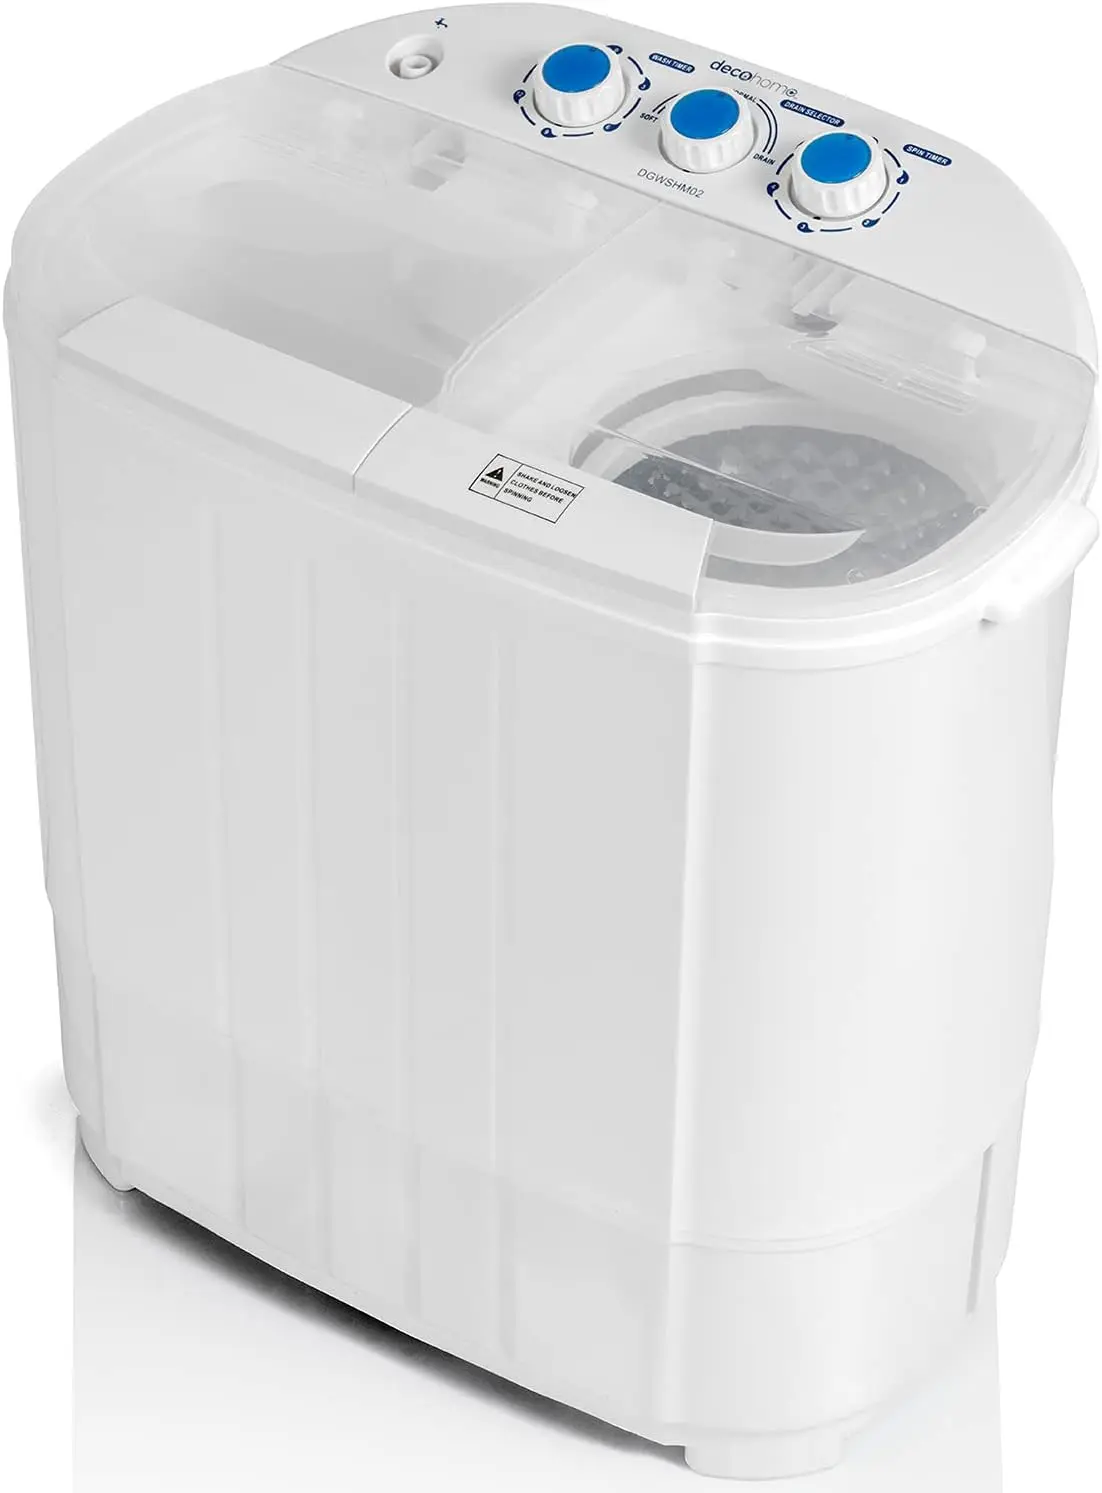  washing machine with twin tub for wash and spin dry portable built in gravity drainage thumb200